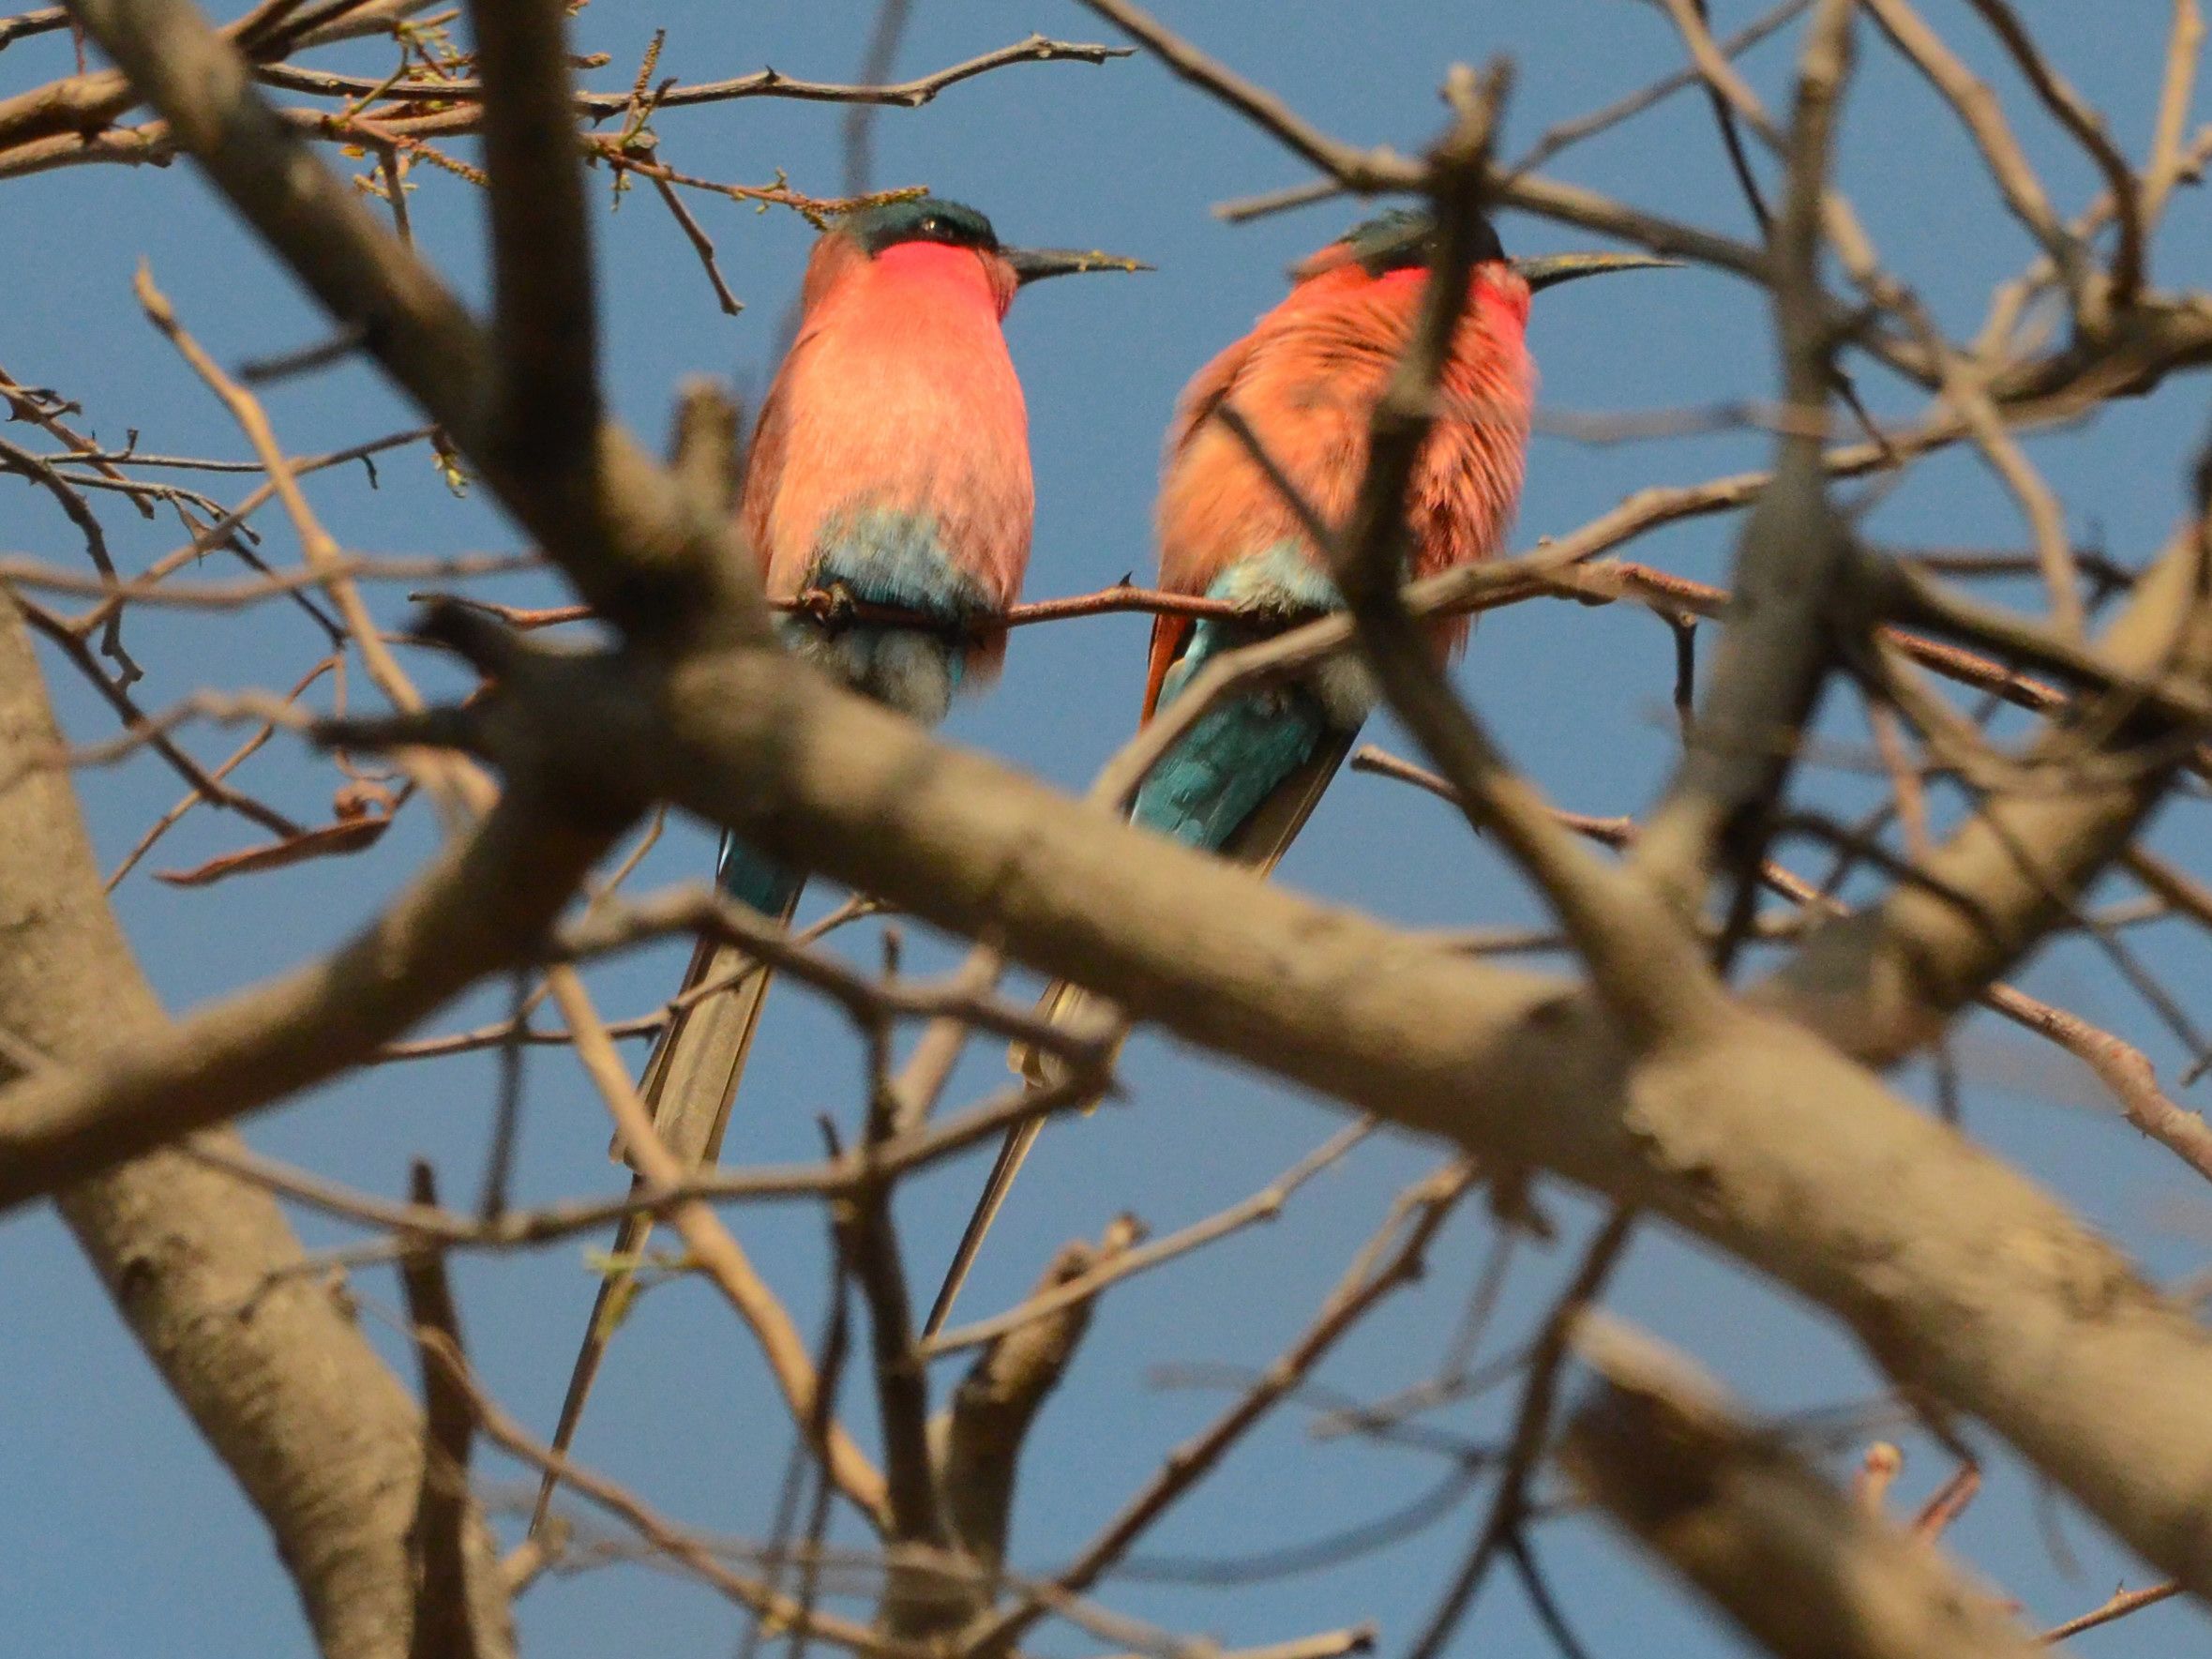 Click picture to see more Southern Carmine Bee-eaters.